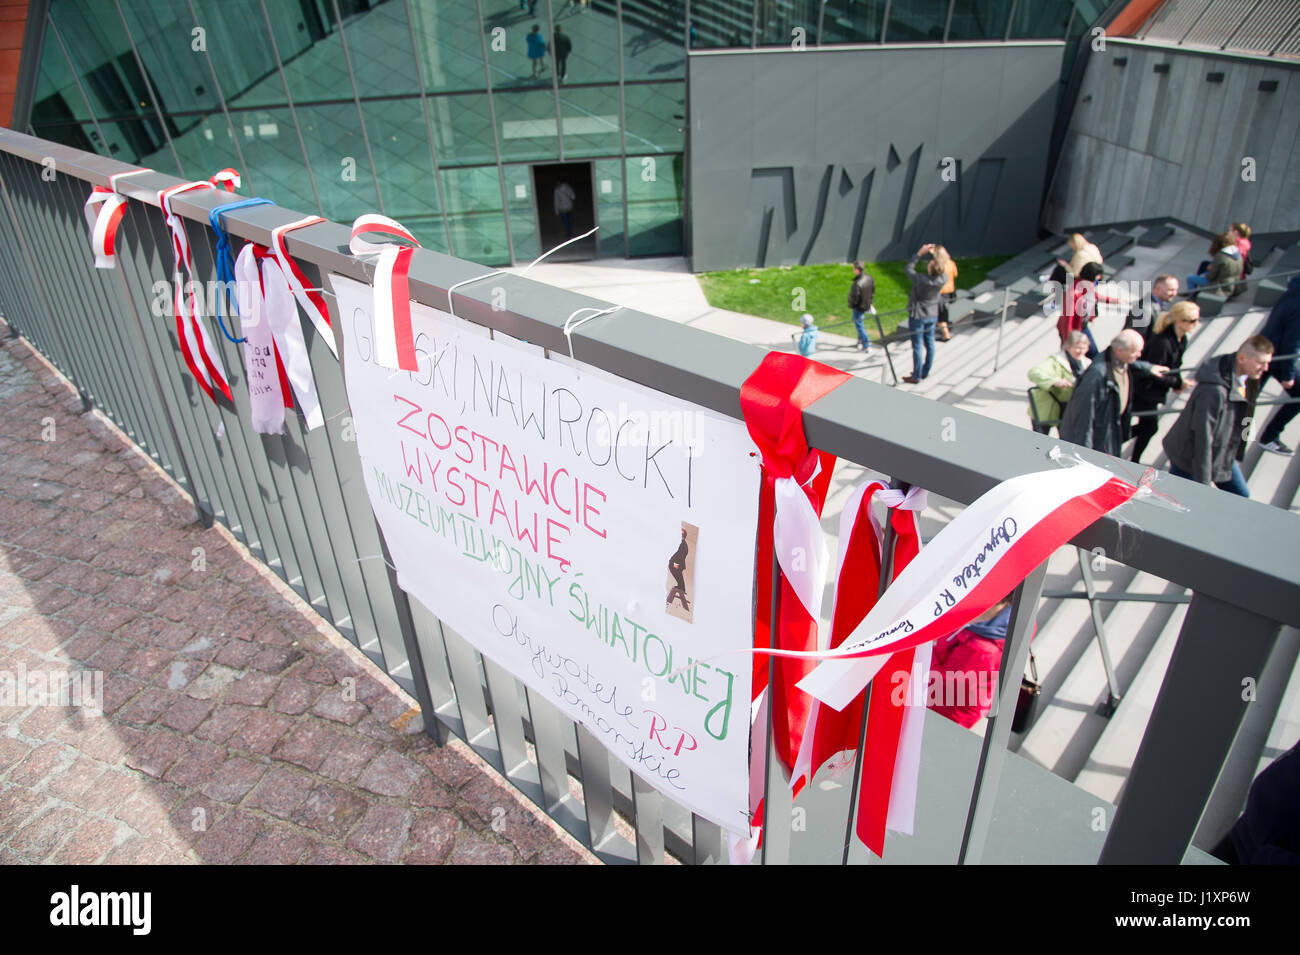 Protest against official connection Museum of the Second World War with Westerplatte Museum. 8 April 2017 in Gdansk, Poland © Wojciech Strozyk / Alamy Stock Photo